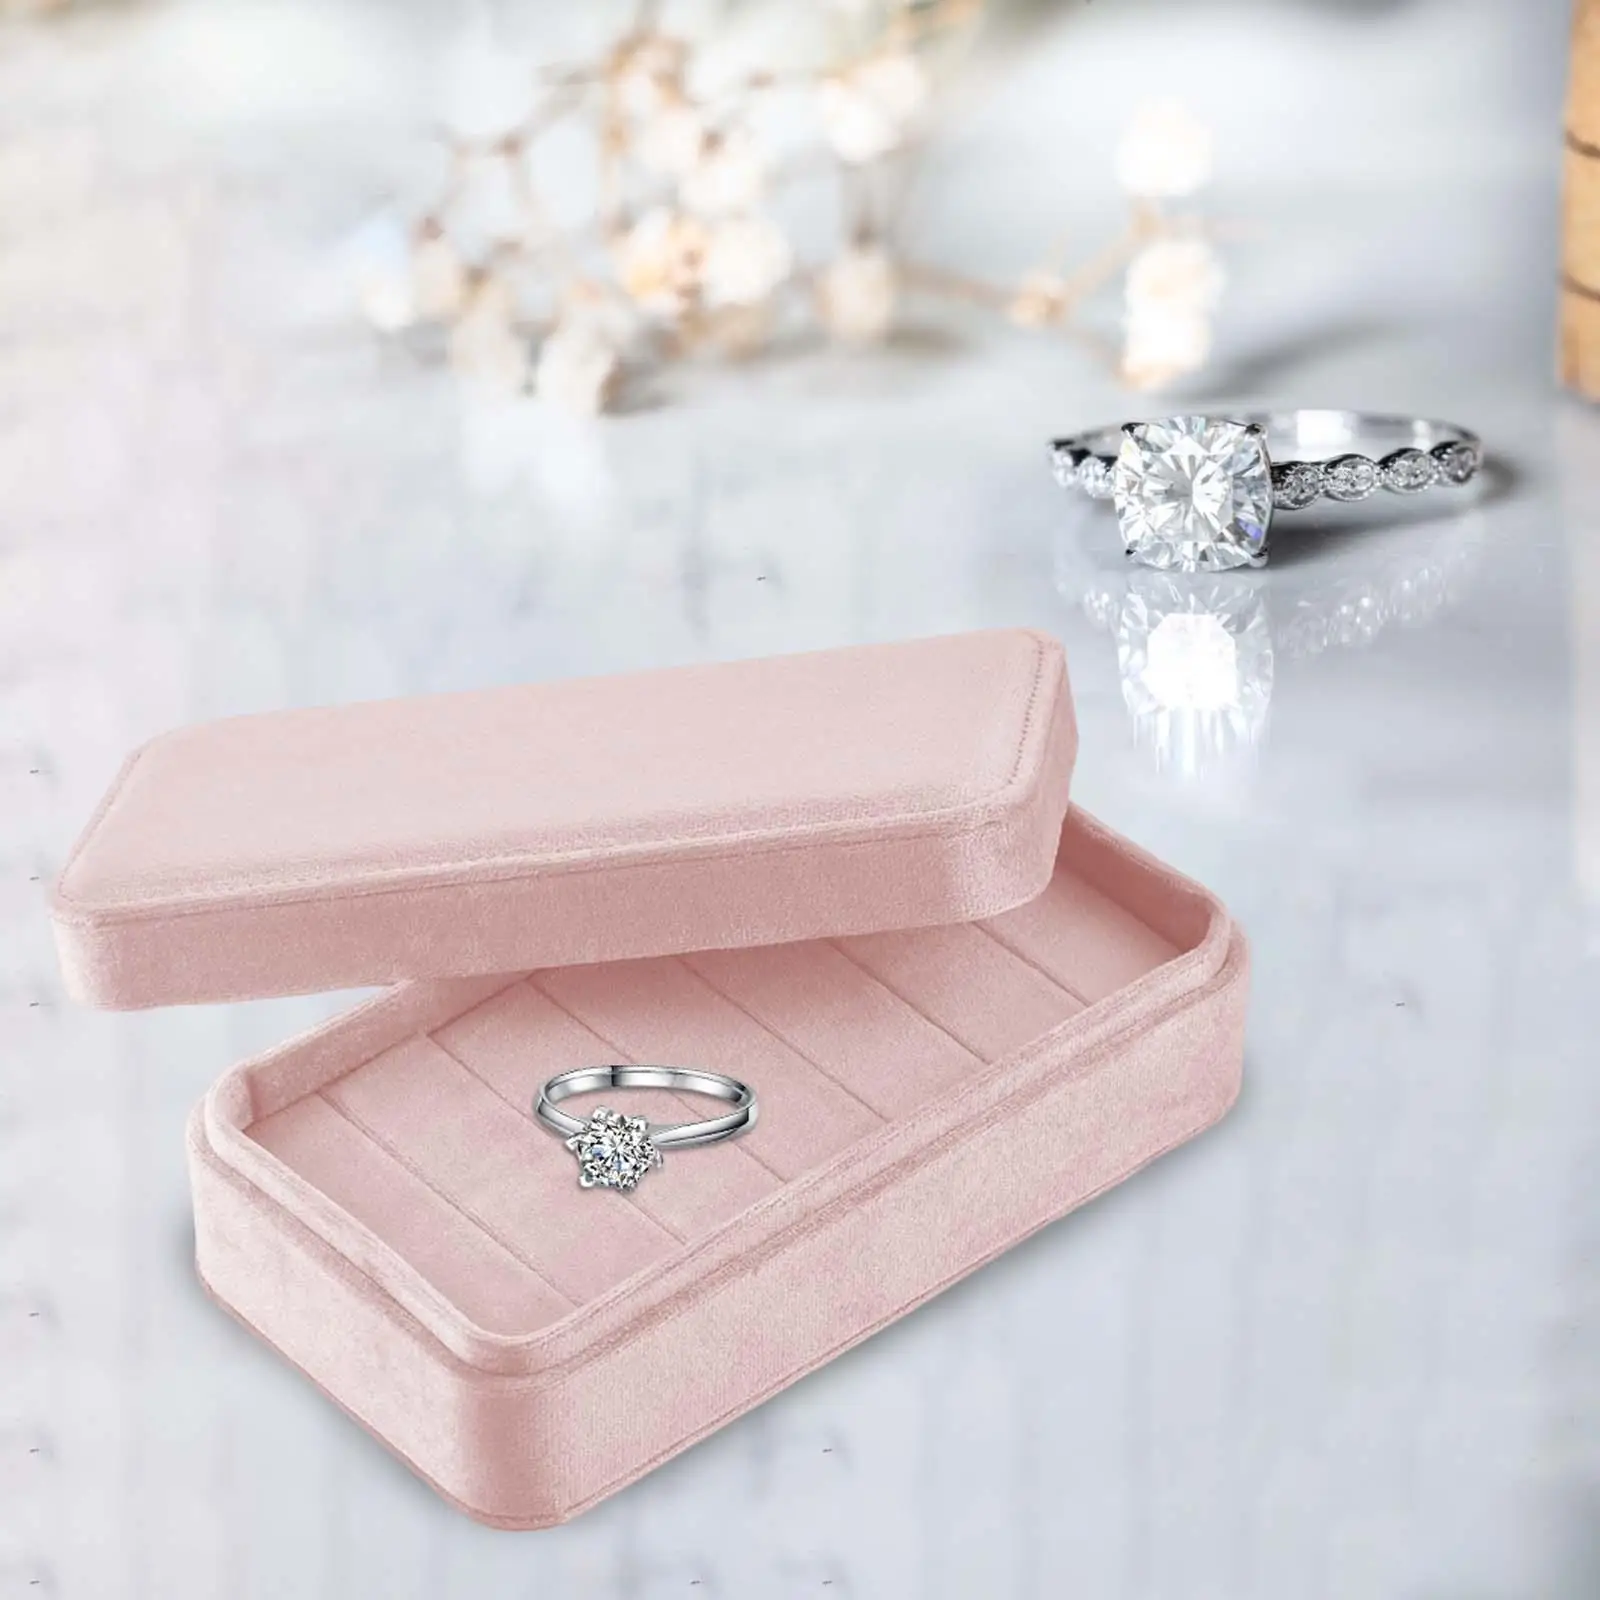 Velvet Rings Display Tray Storage Case with Lid Organizer Earrings Jewelry Box for Multiple Rings Drawer Dress Tables Cabinets